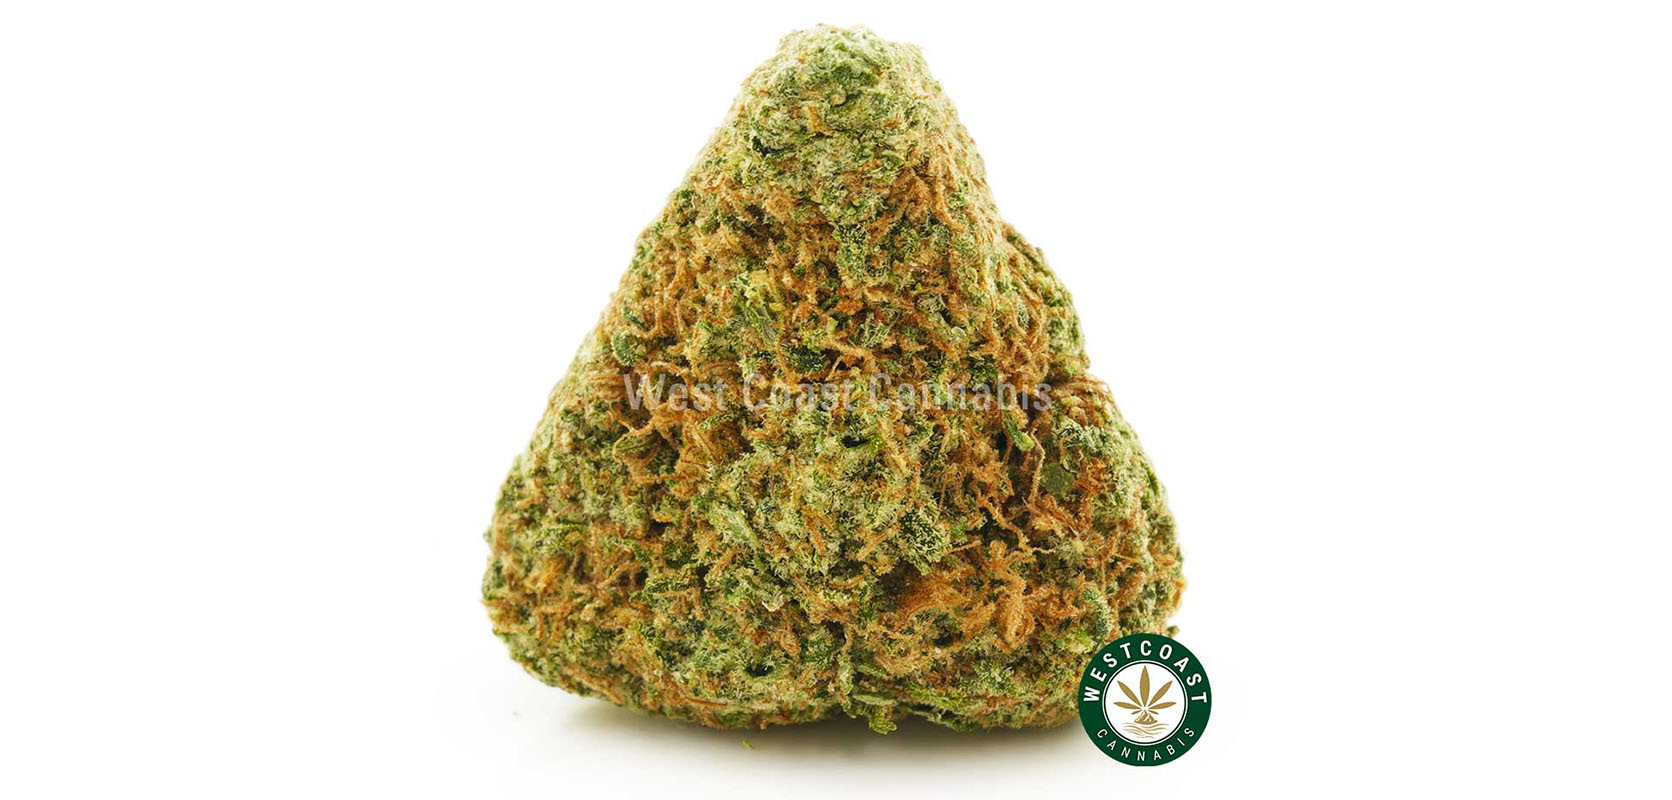 buy strawberry haze weed online from west coast cannabis in BC. Best indica strains with fast hipping to your door.